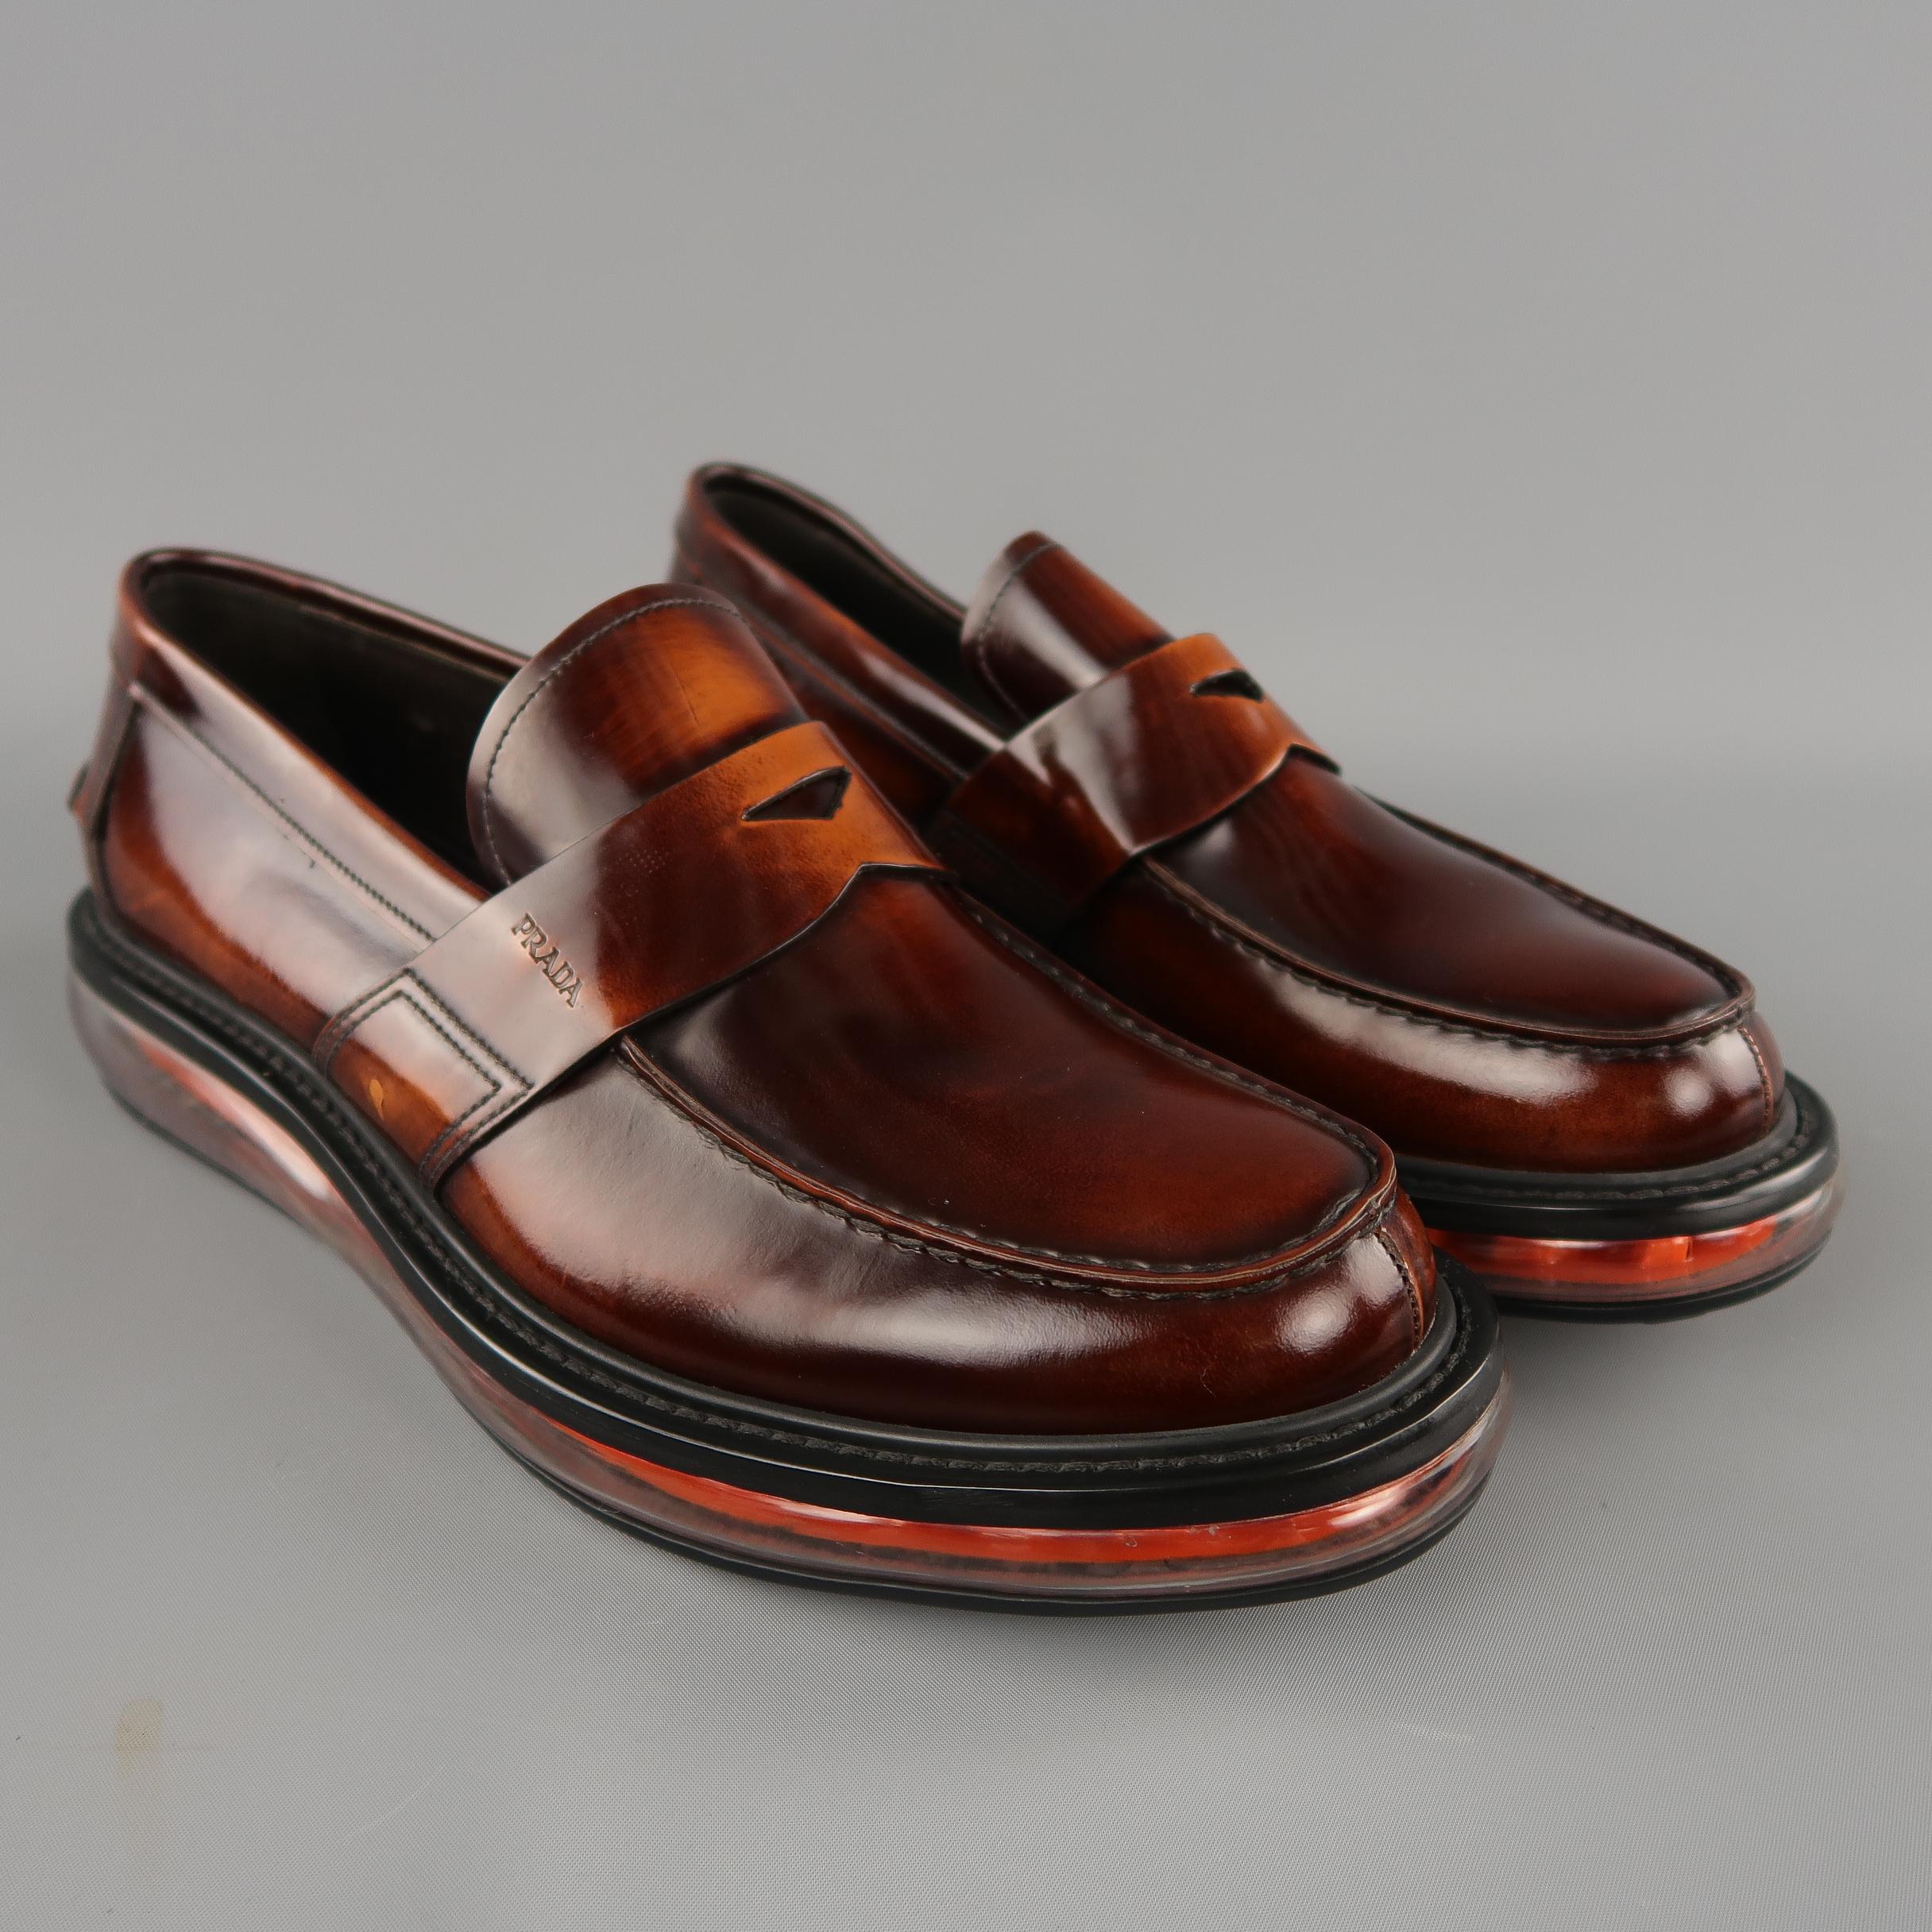 PRADA penny loafers come in antique brown patent leather with an apron sole and orange levitate sole. Made in Italy.  Retails: $880
 
Excellent Pre-Owned Condition.
Marked: UK 10 1/2
 
Outsole: 12.5 x 4.5 in.
Sole: 1 in.